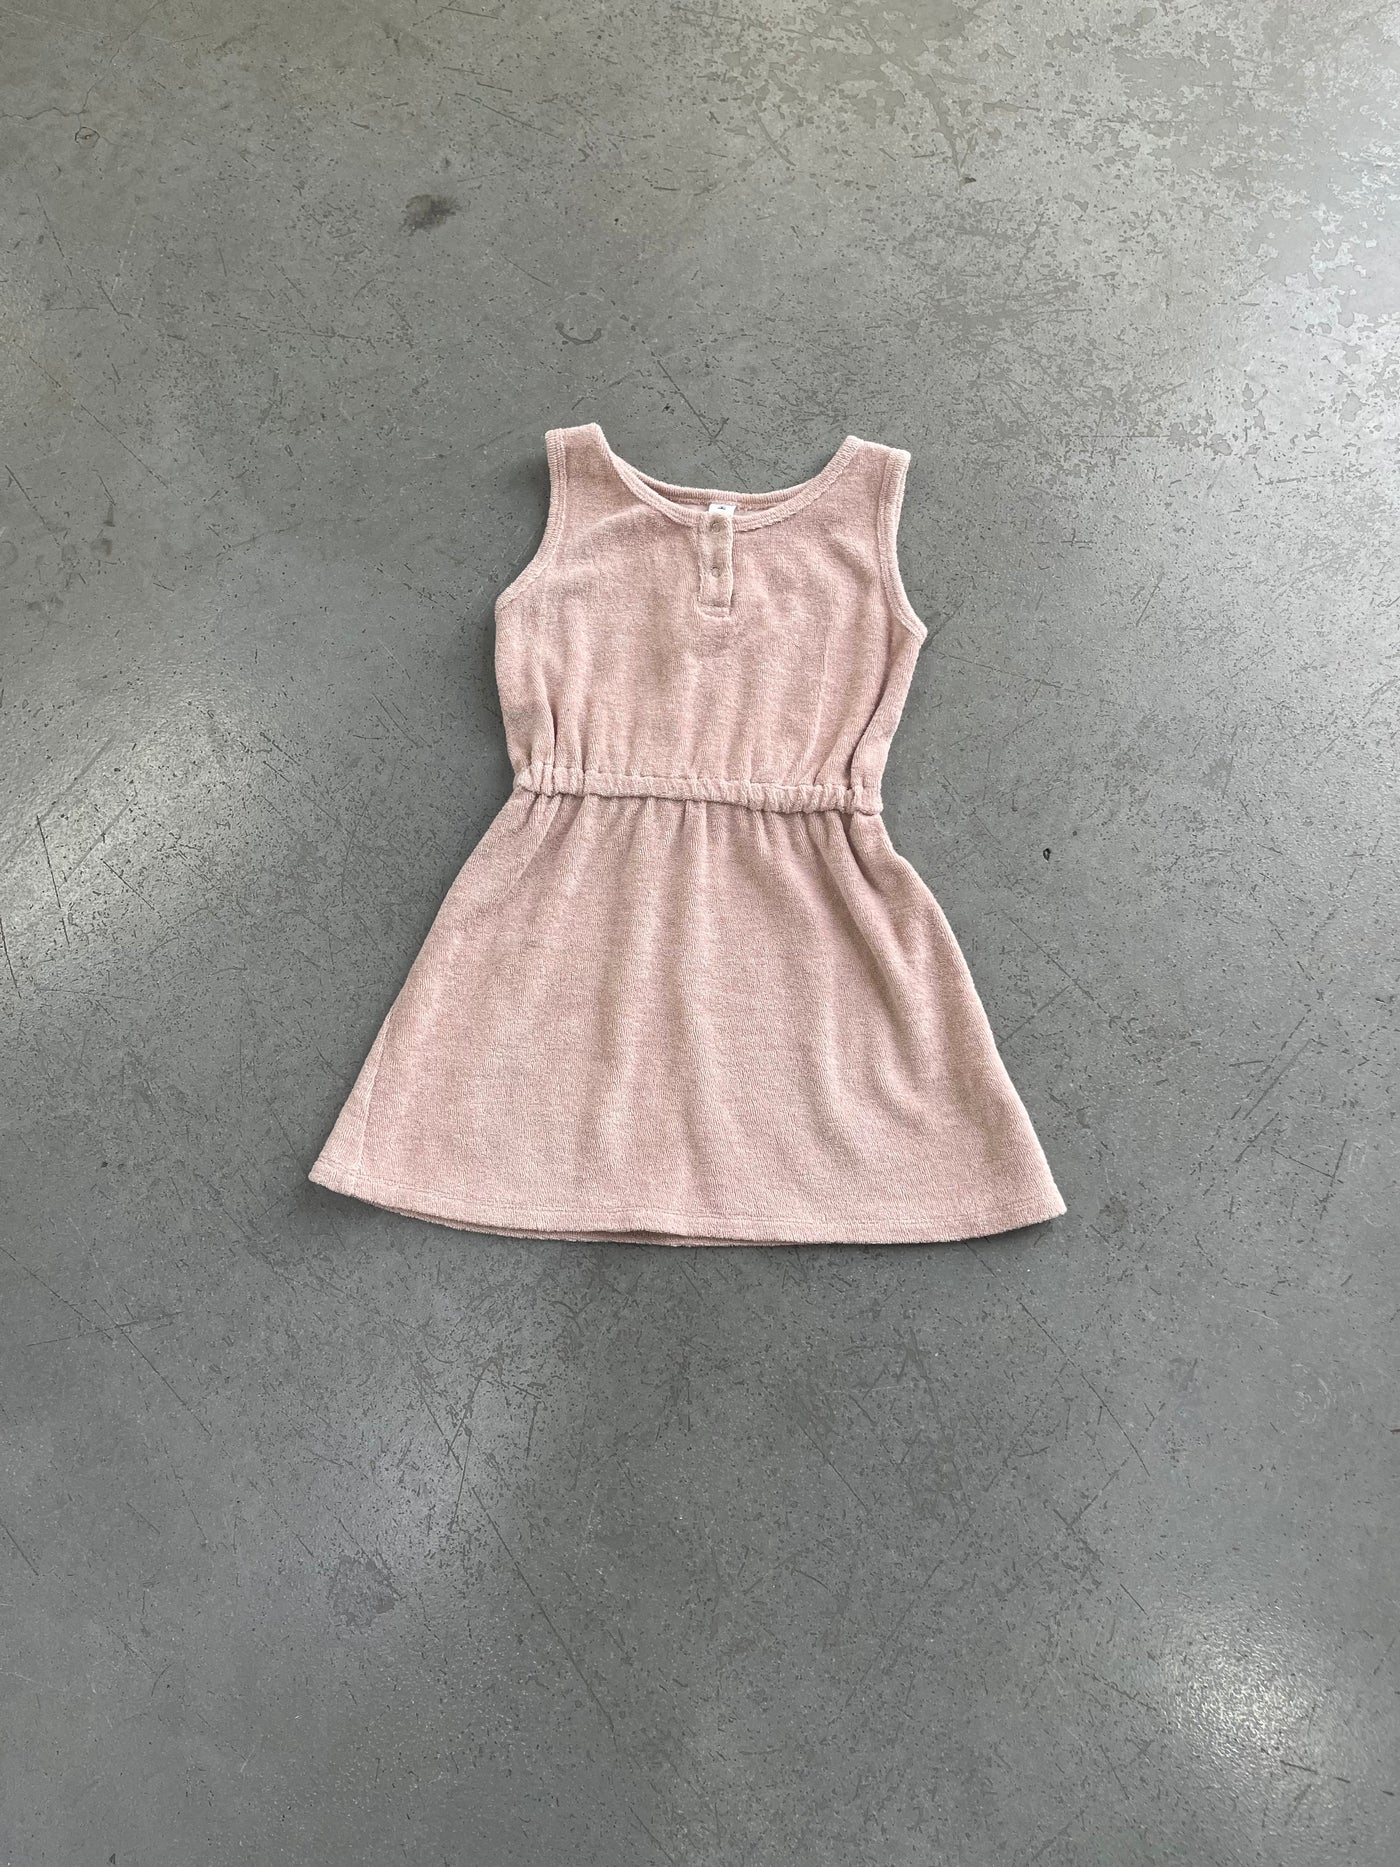 Pre-loved Huxbaby Terry Towelling Dress - 5Y